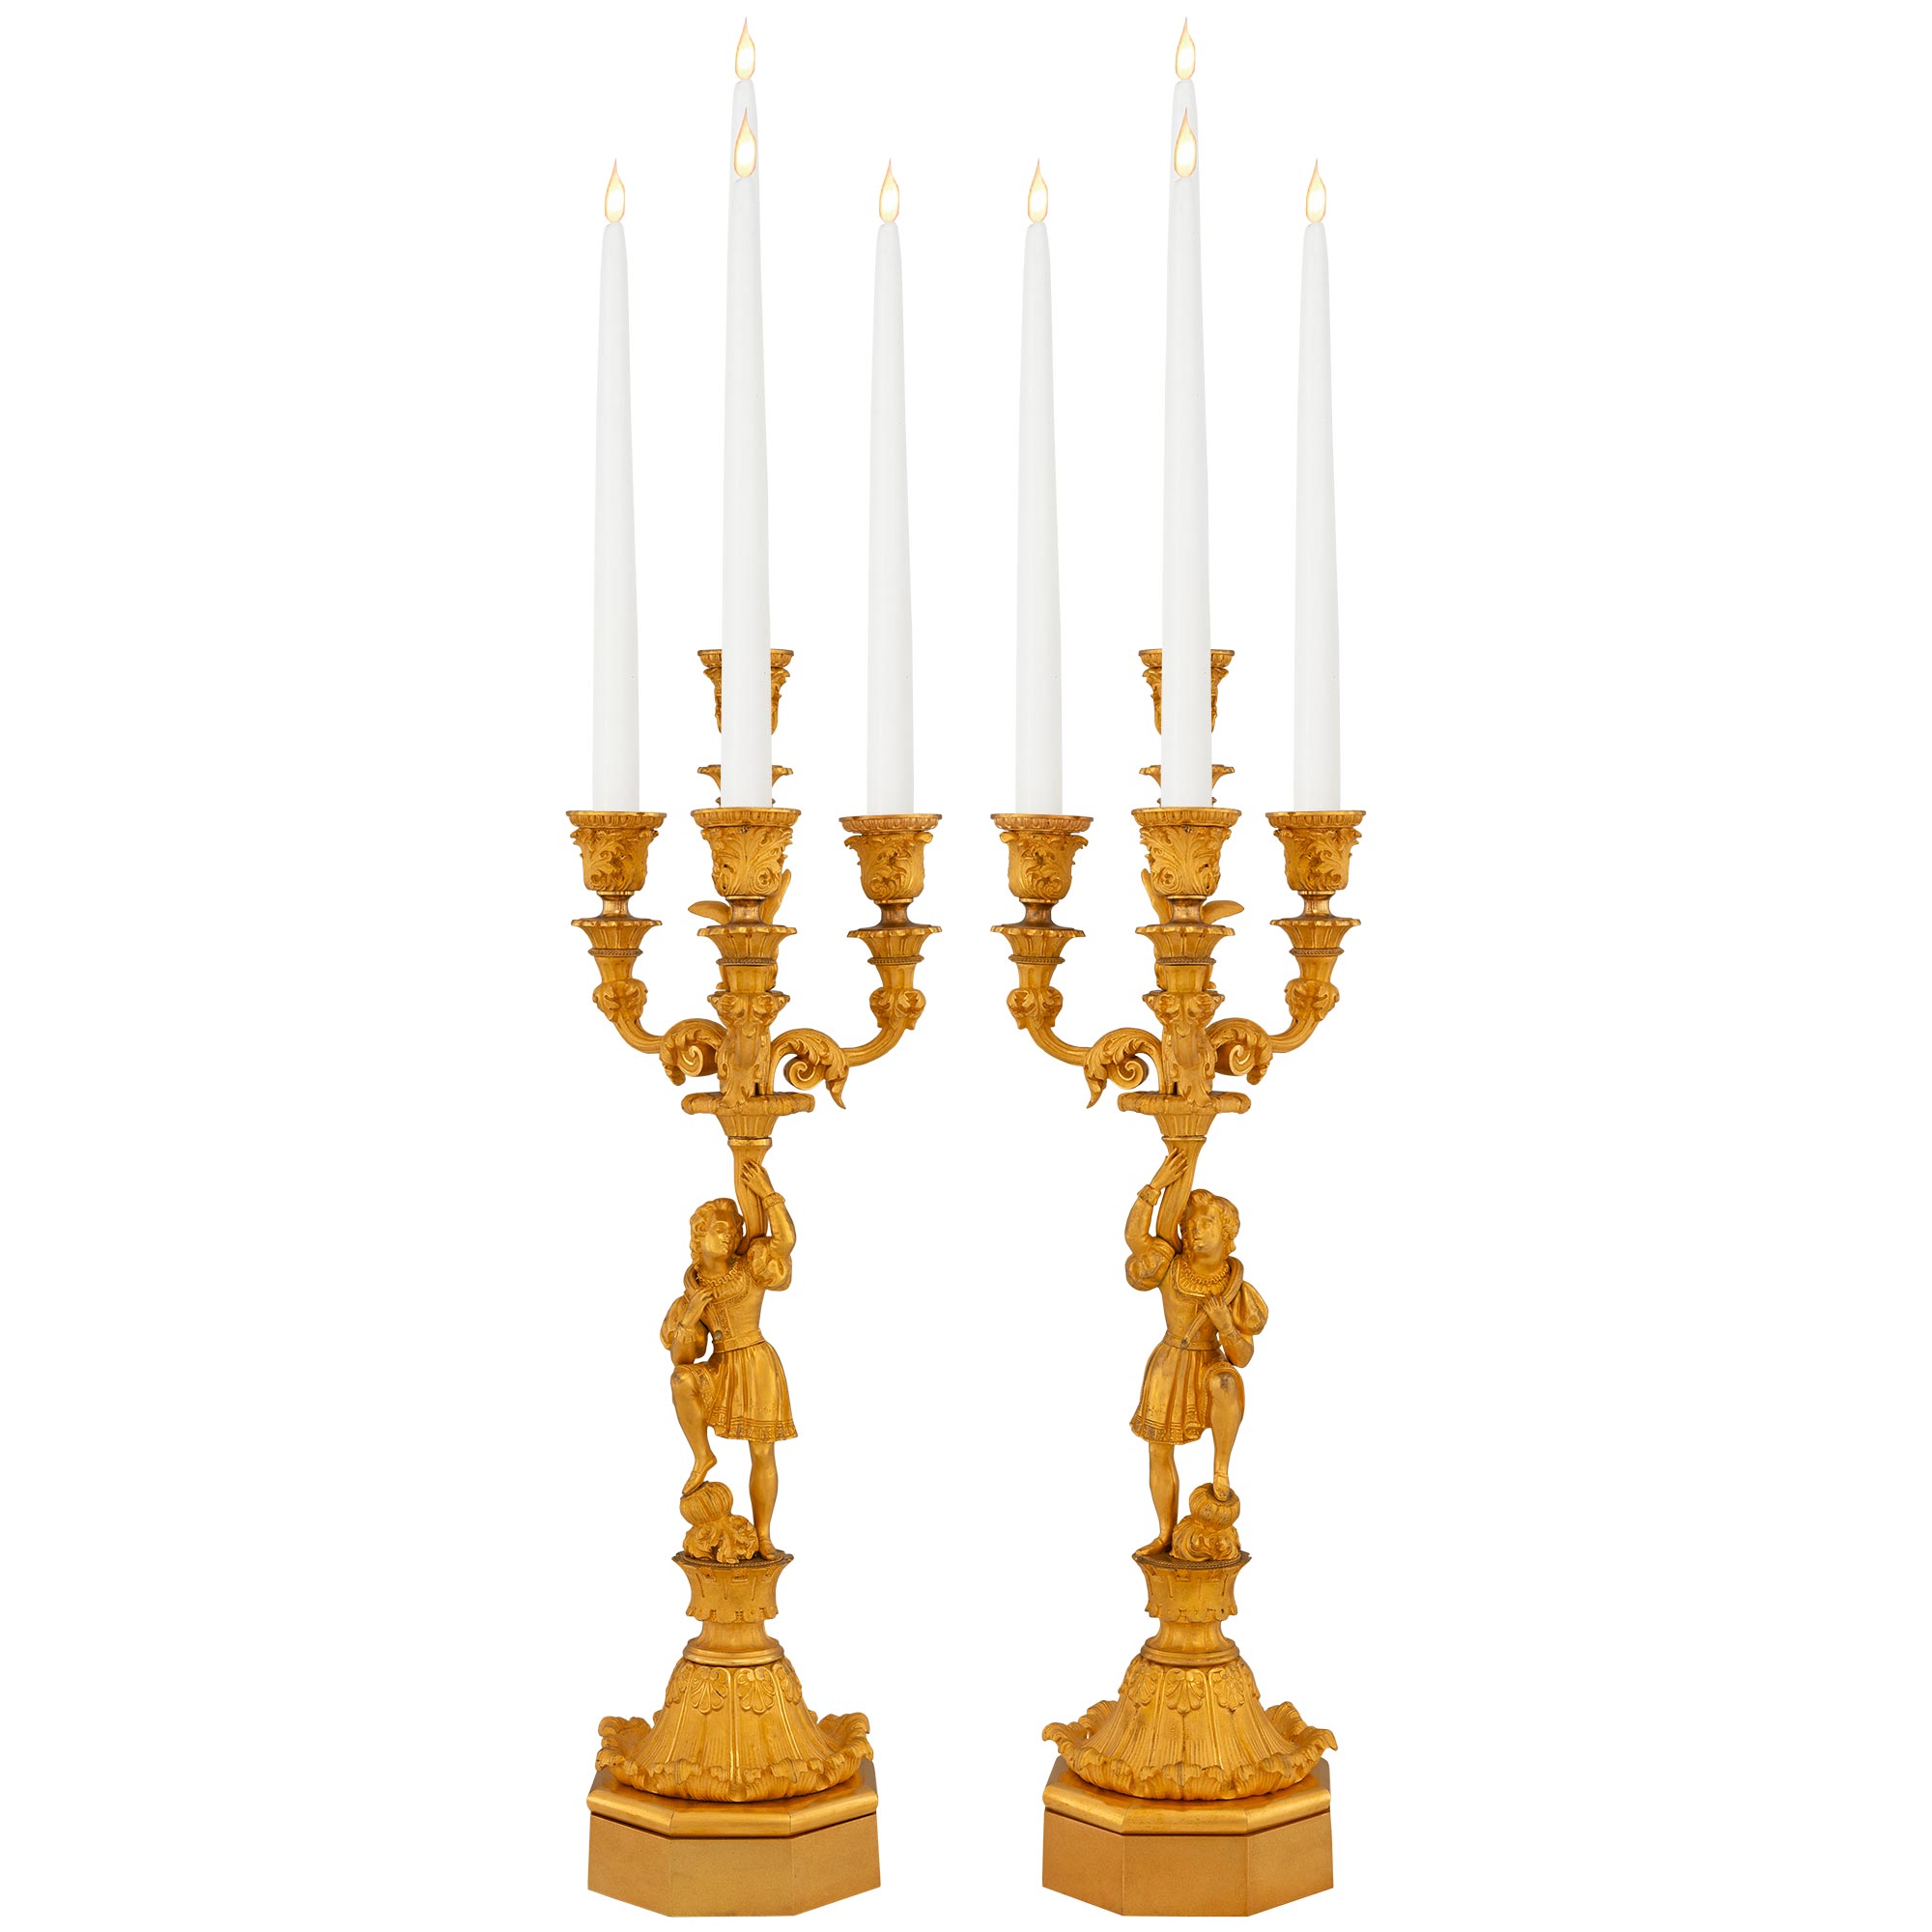 French 19th Century Turned Wood Candlesticks - a Pair